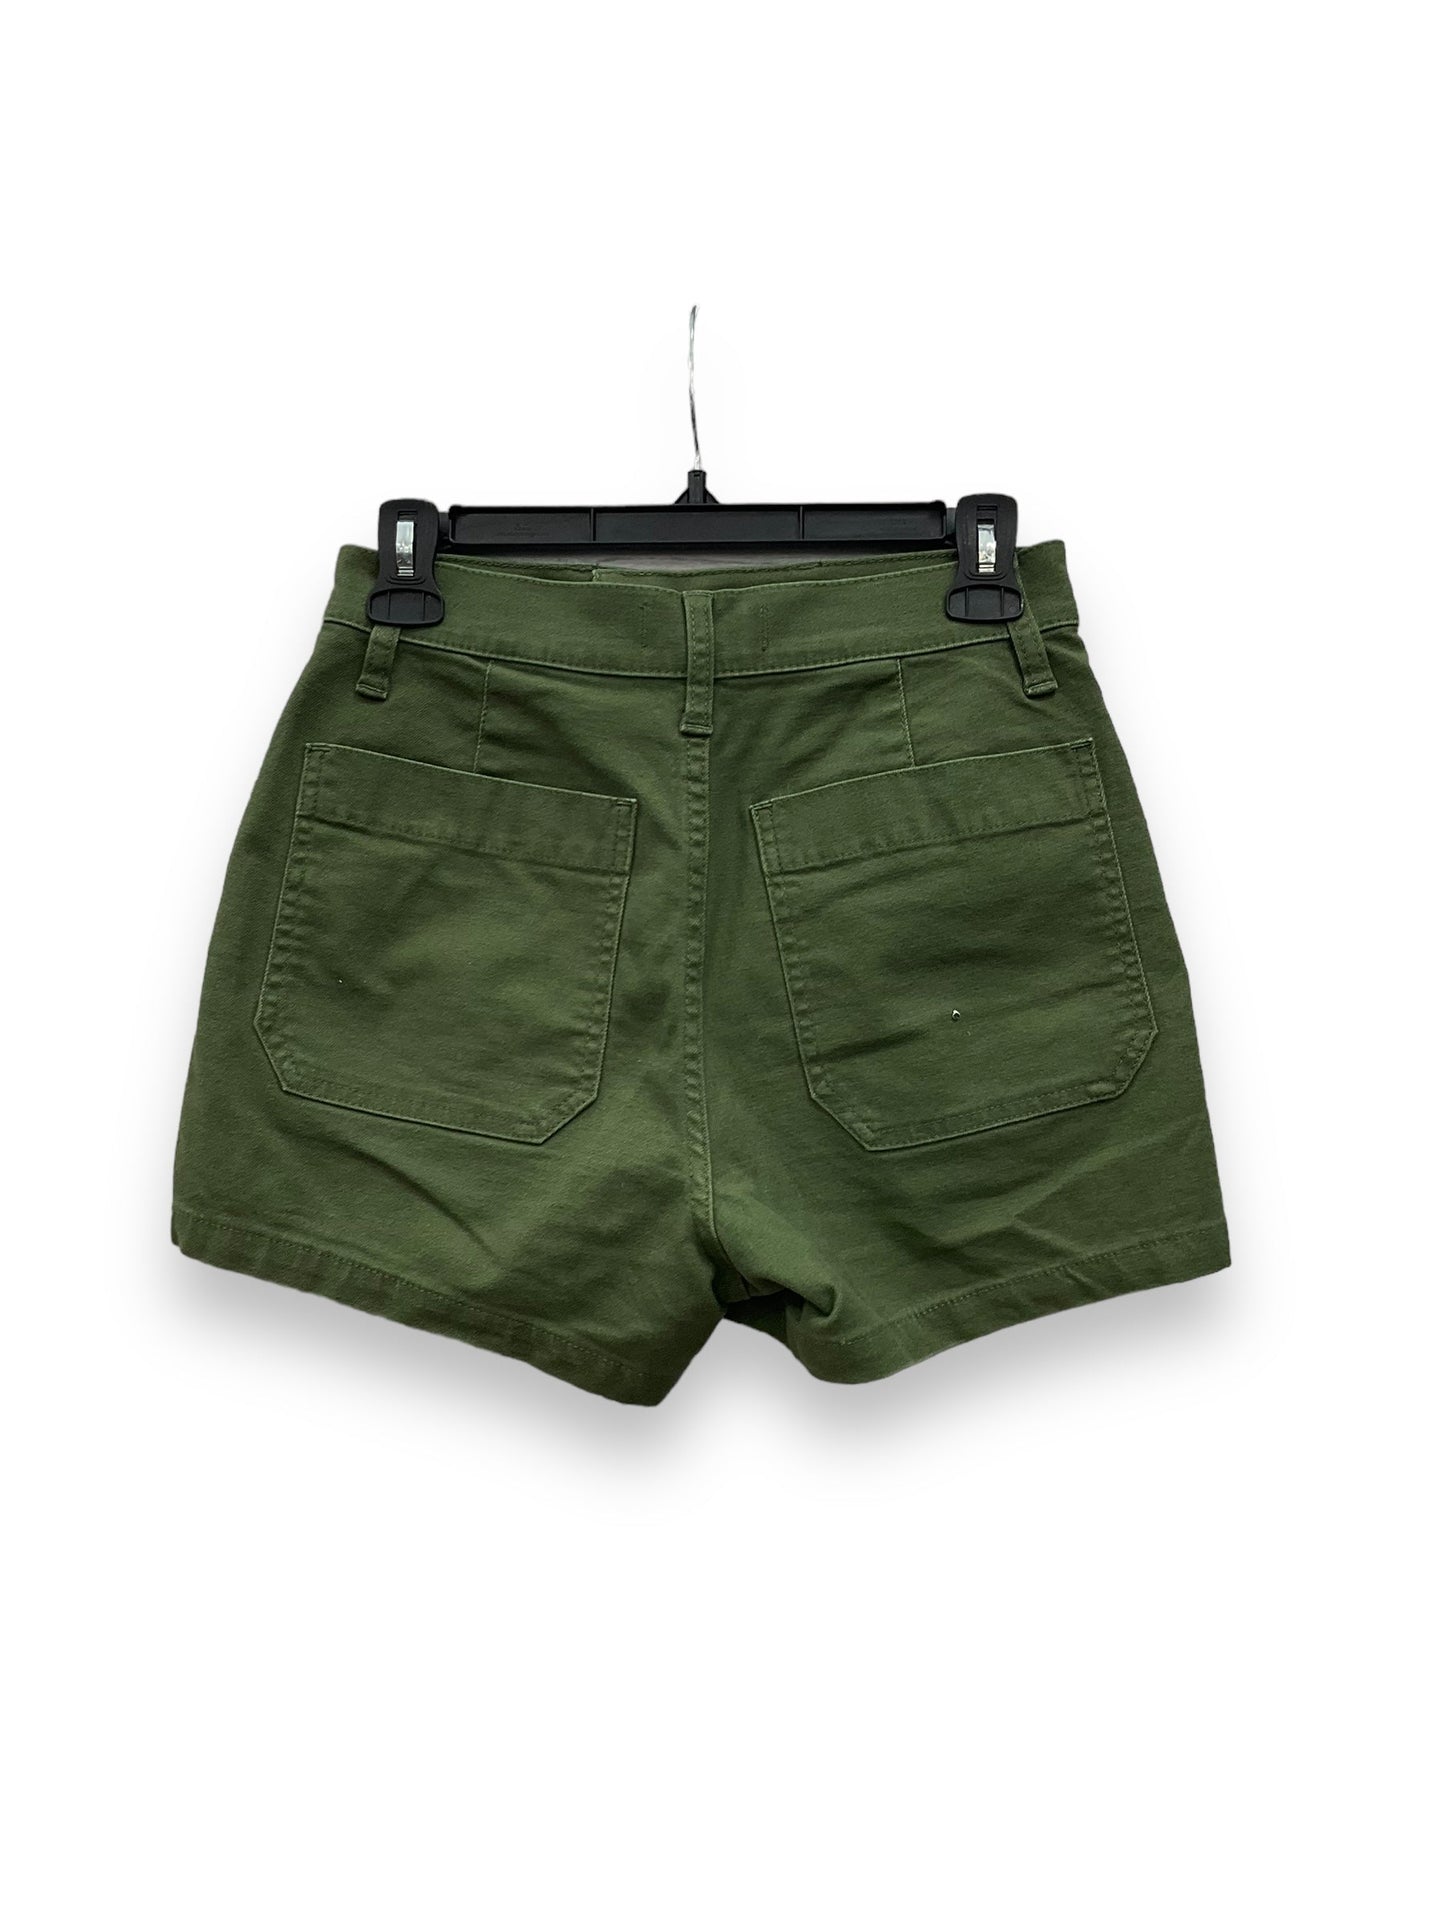 Green Shorts Madewell, Size 0